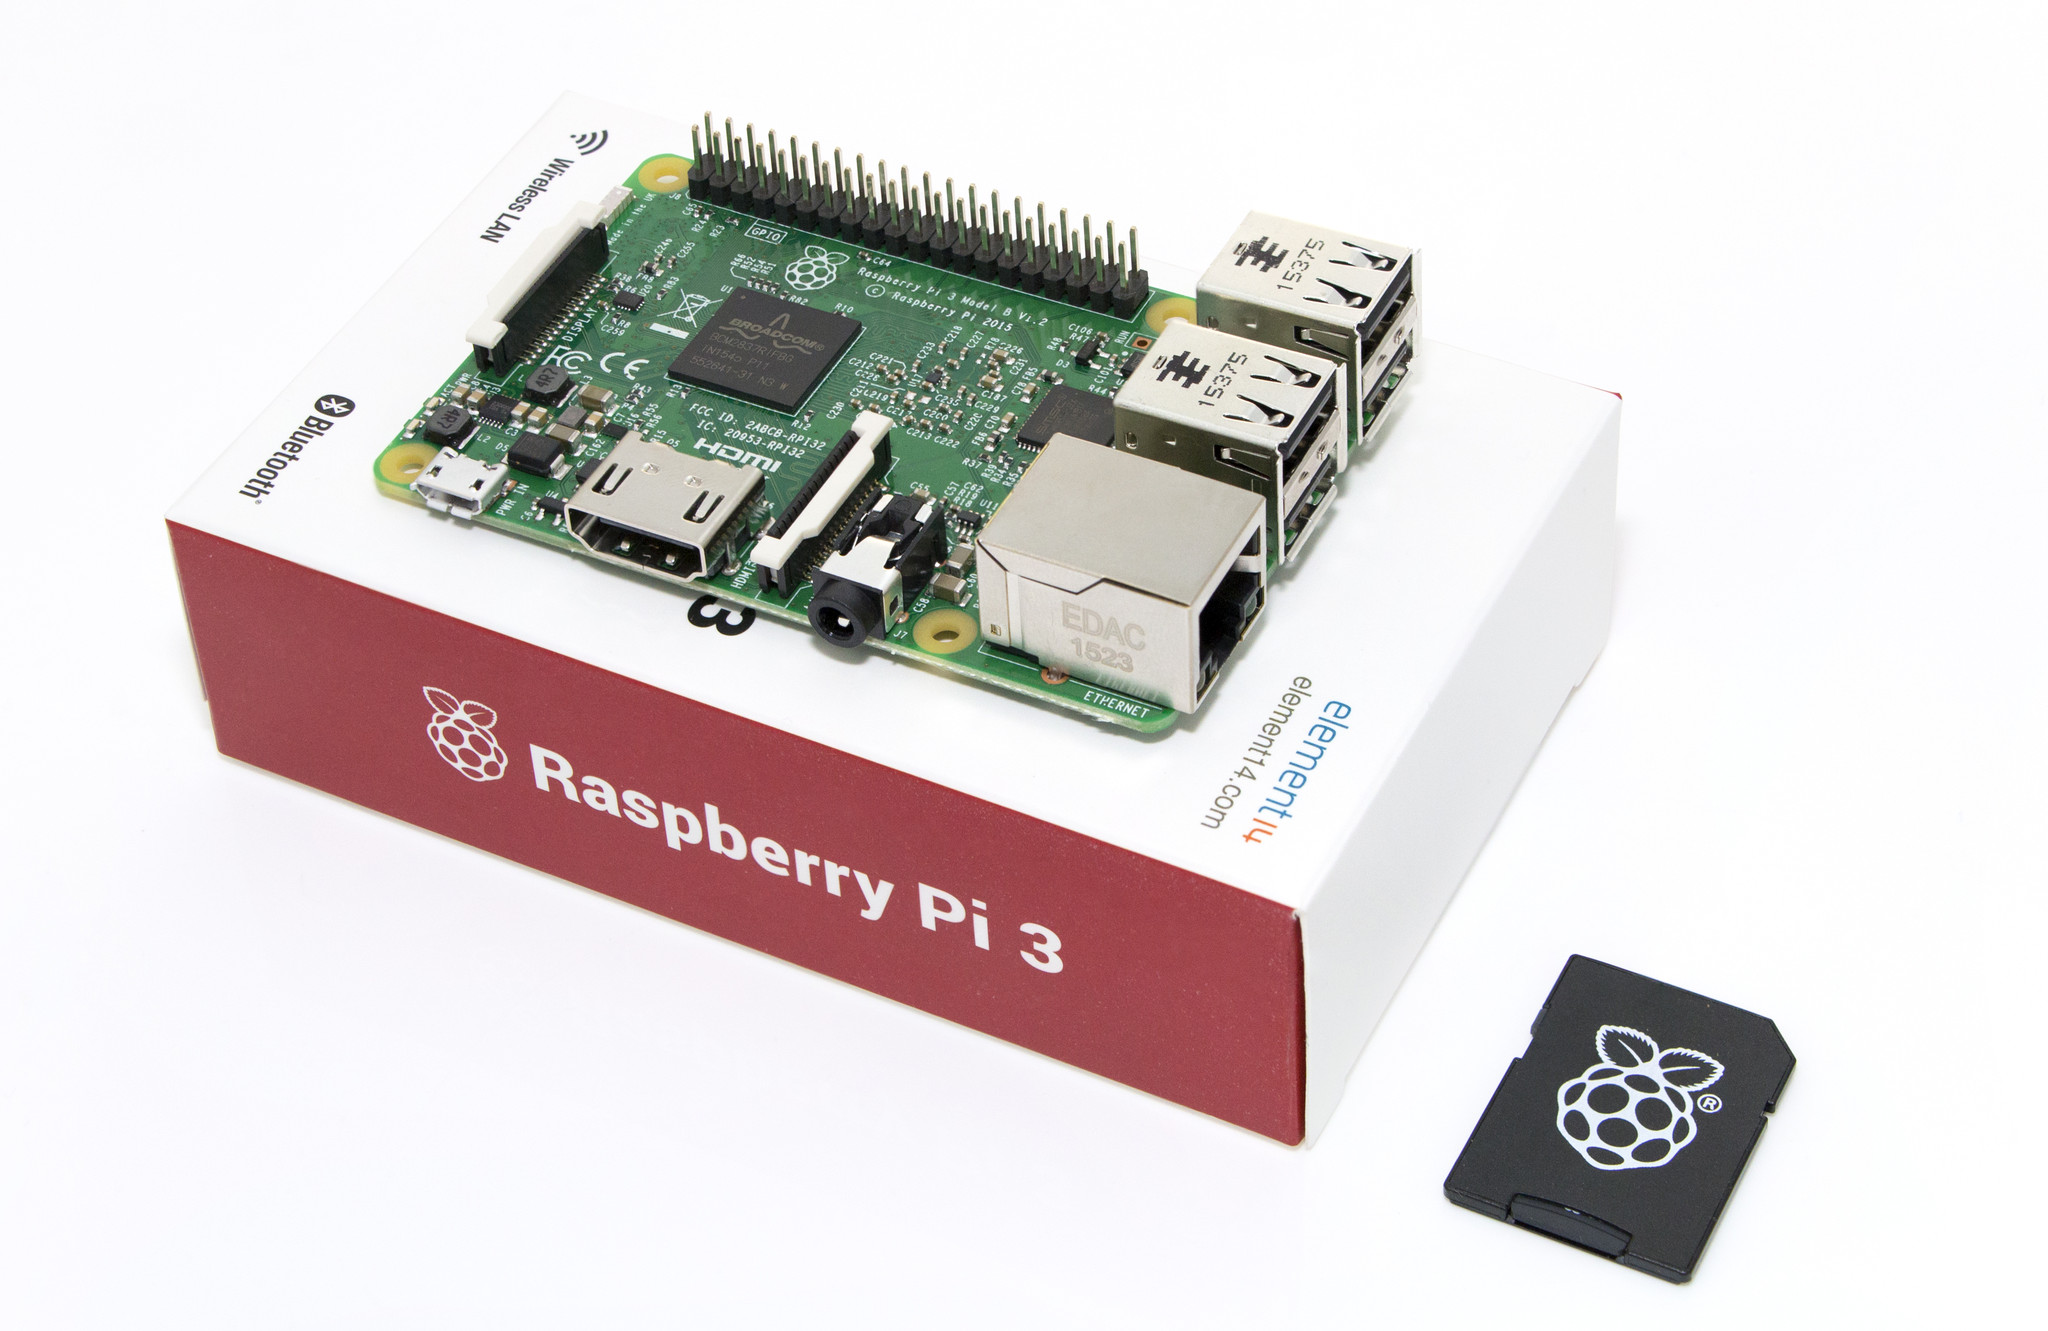 Android 7.0 Nougat available for Raspberry Pi 3 1